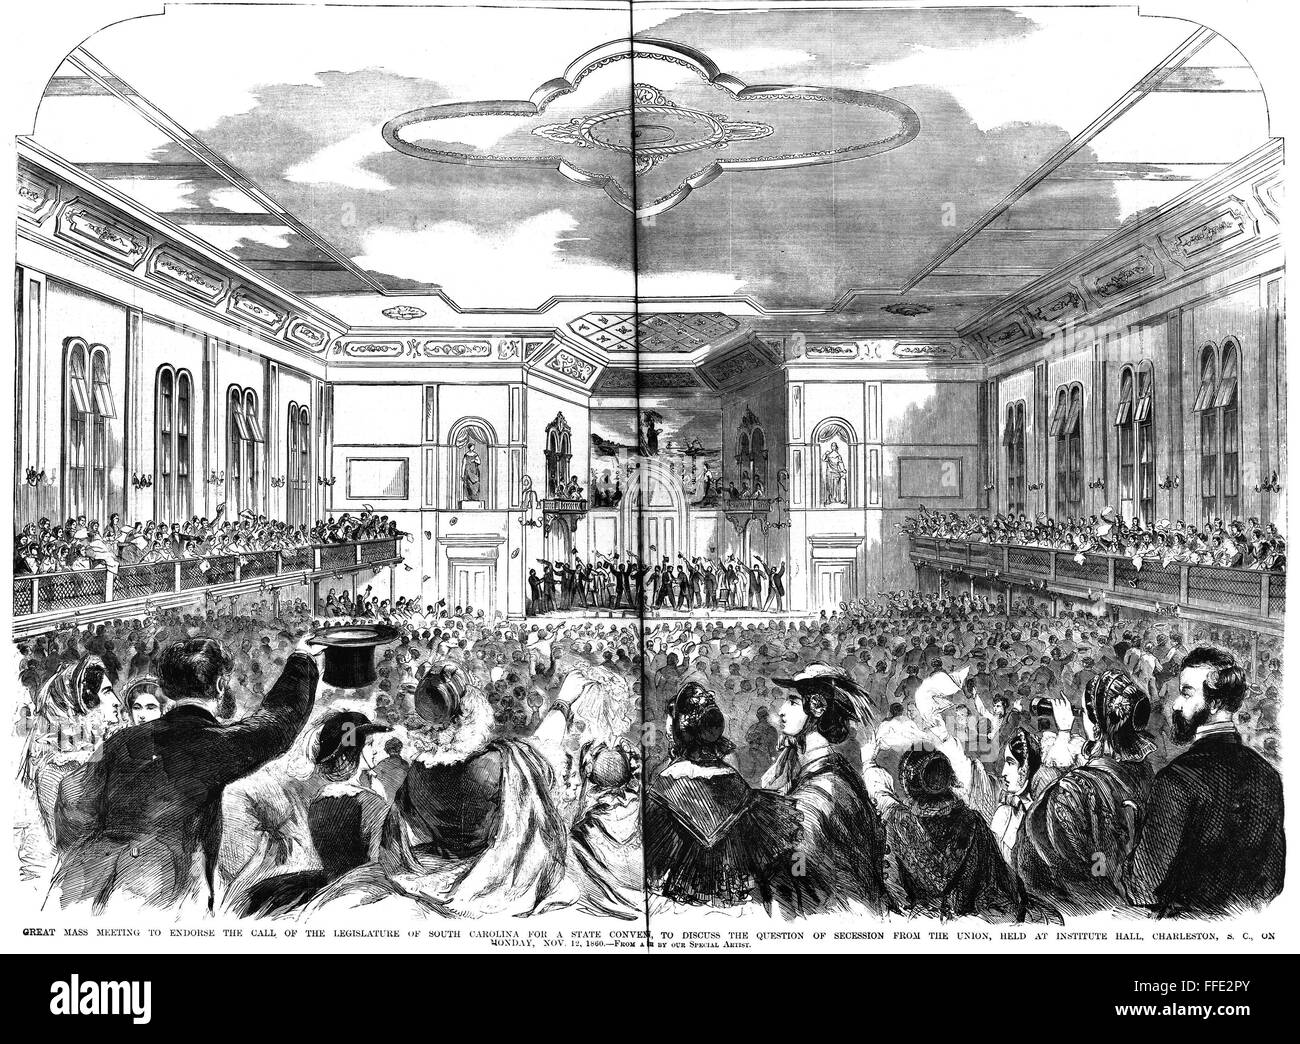 SOUTH CAROLINA: SECESSION. /nMass meeting held at Institute Hall in Charleston, South Carolina, 12 November 1860, to endorse the call of the legislature for a state convention to discuss secession from the Union. Contemporary American wood engraving. Stock Photo